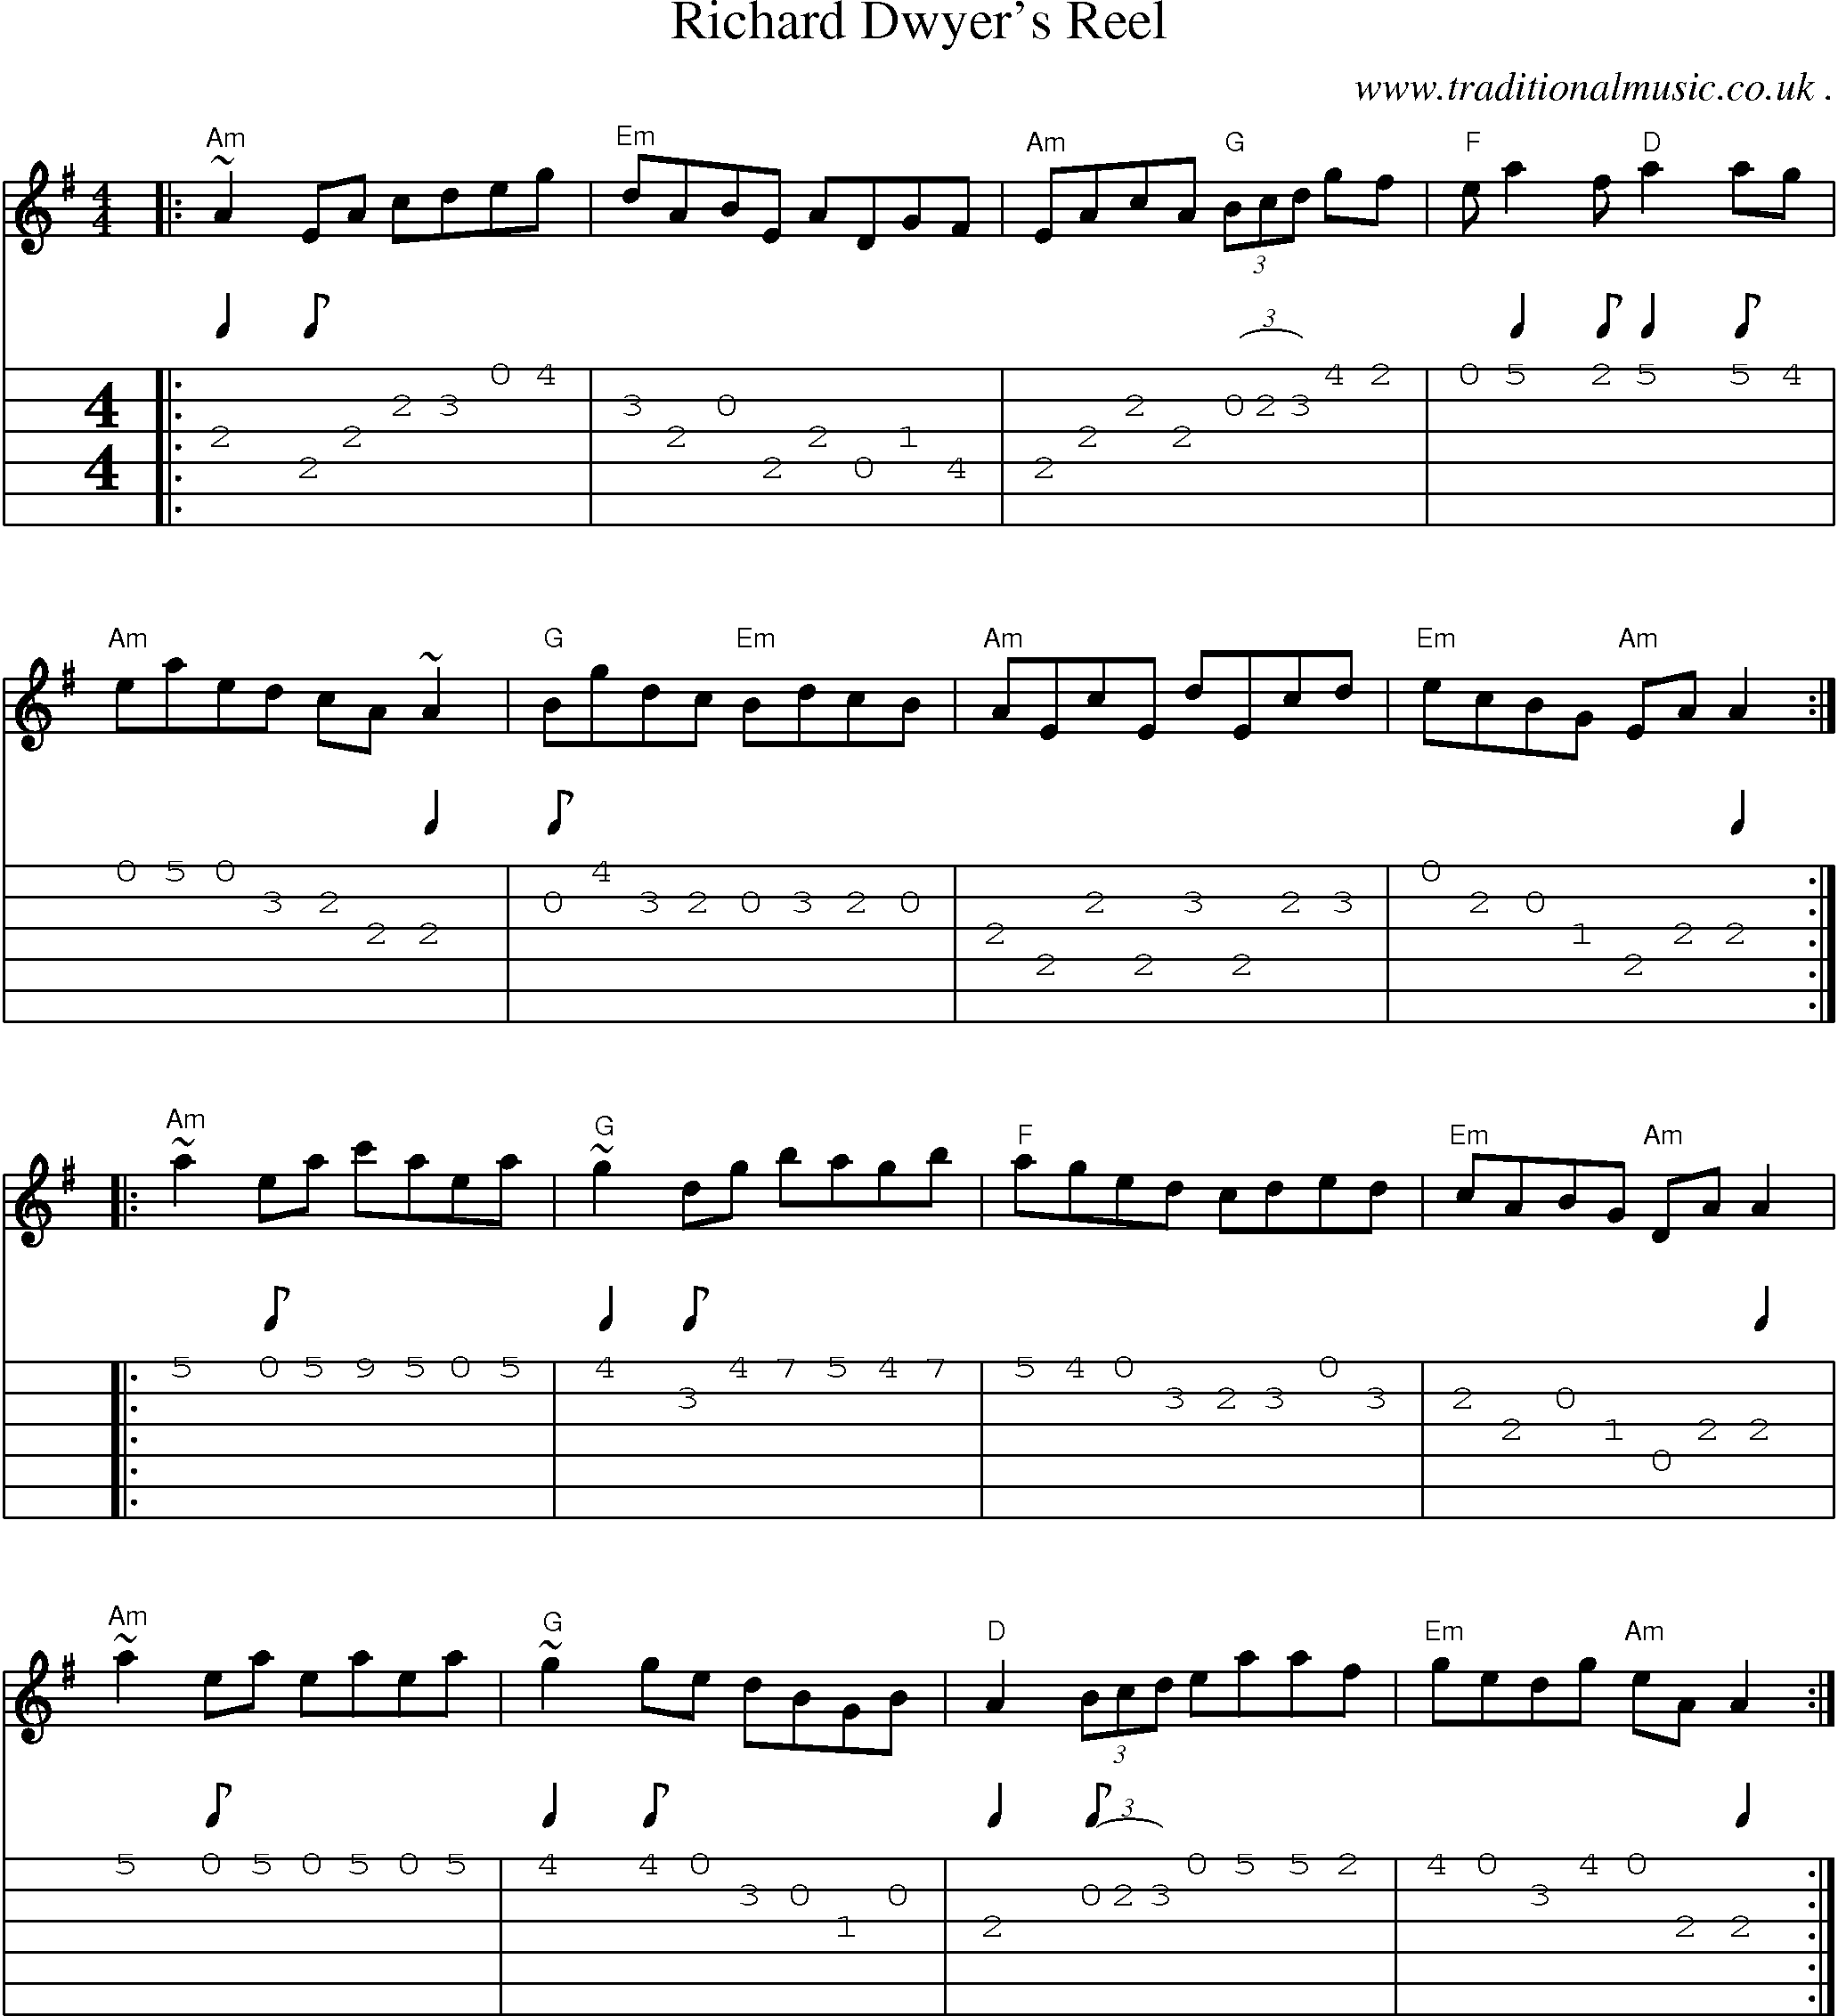 Music Score and Guitar Tabs for Richard Dwyers Reel